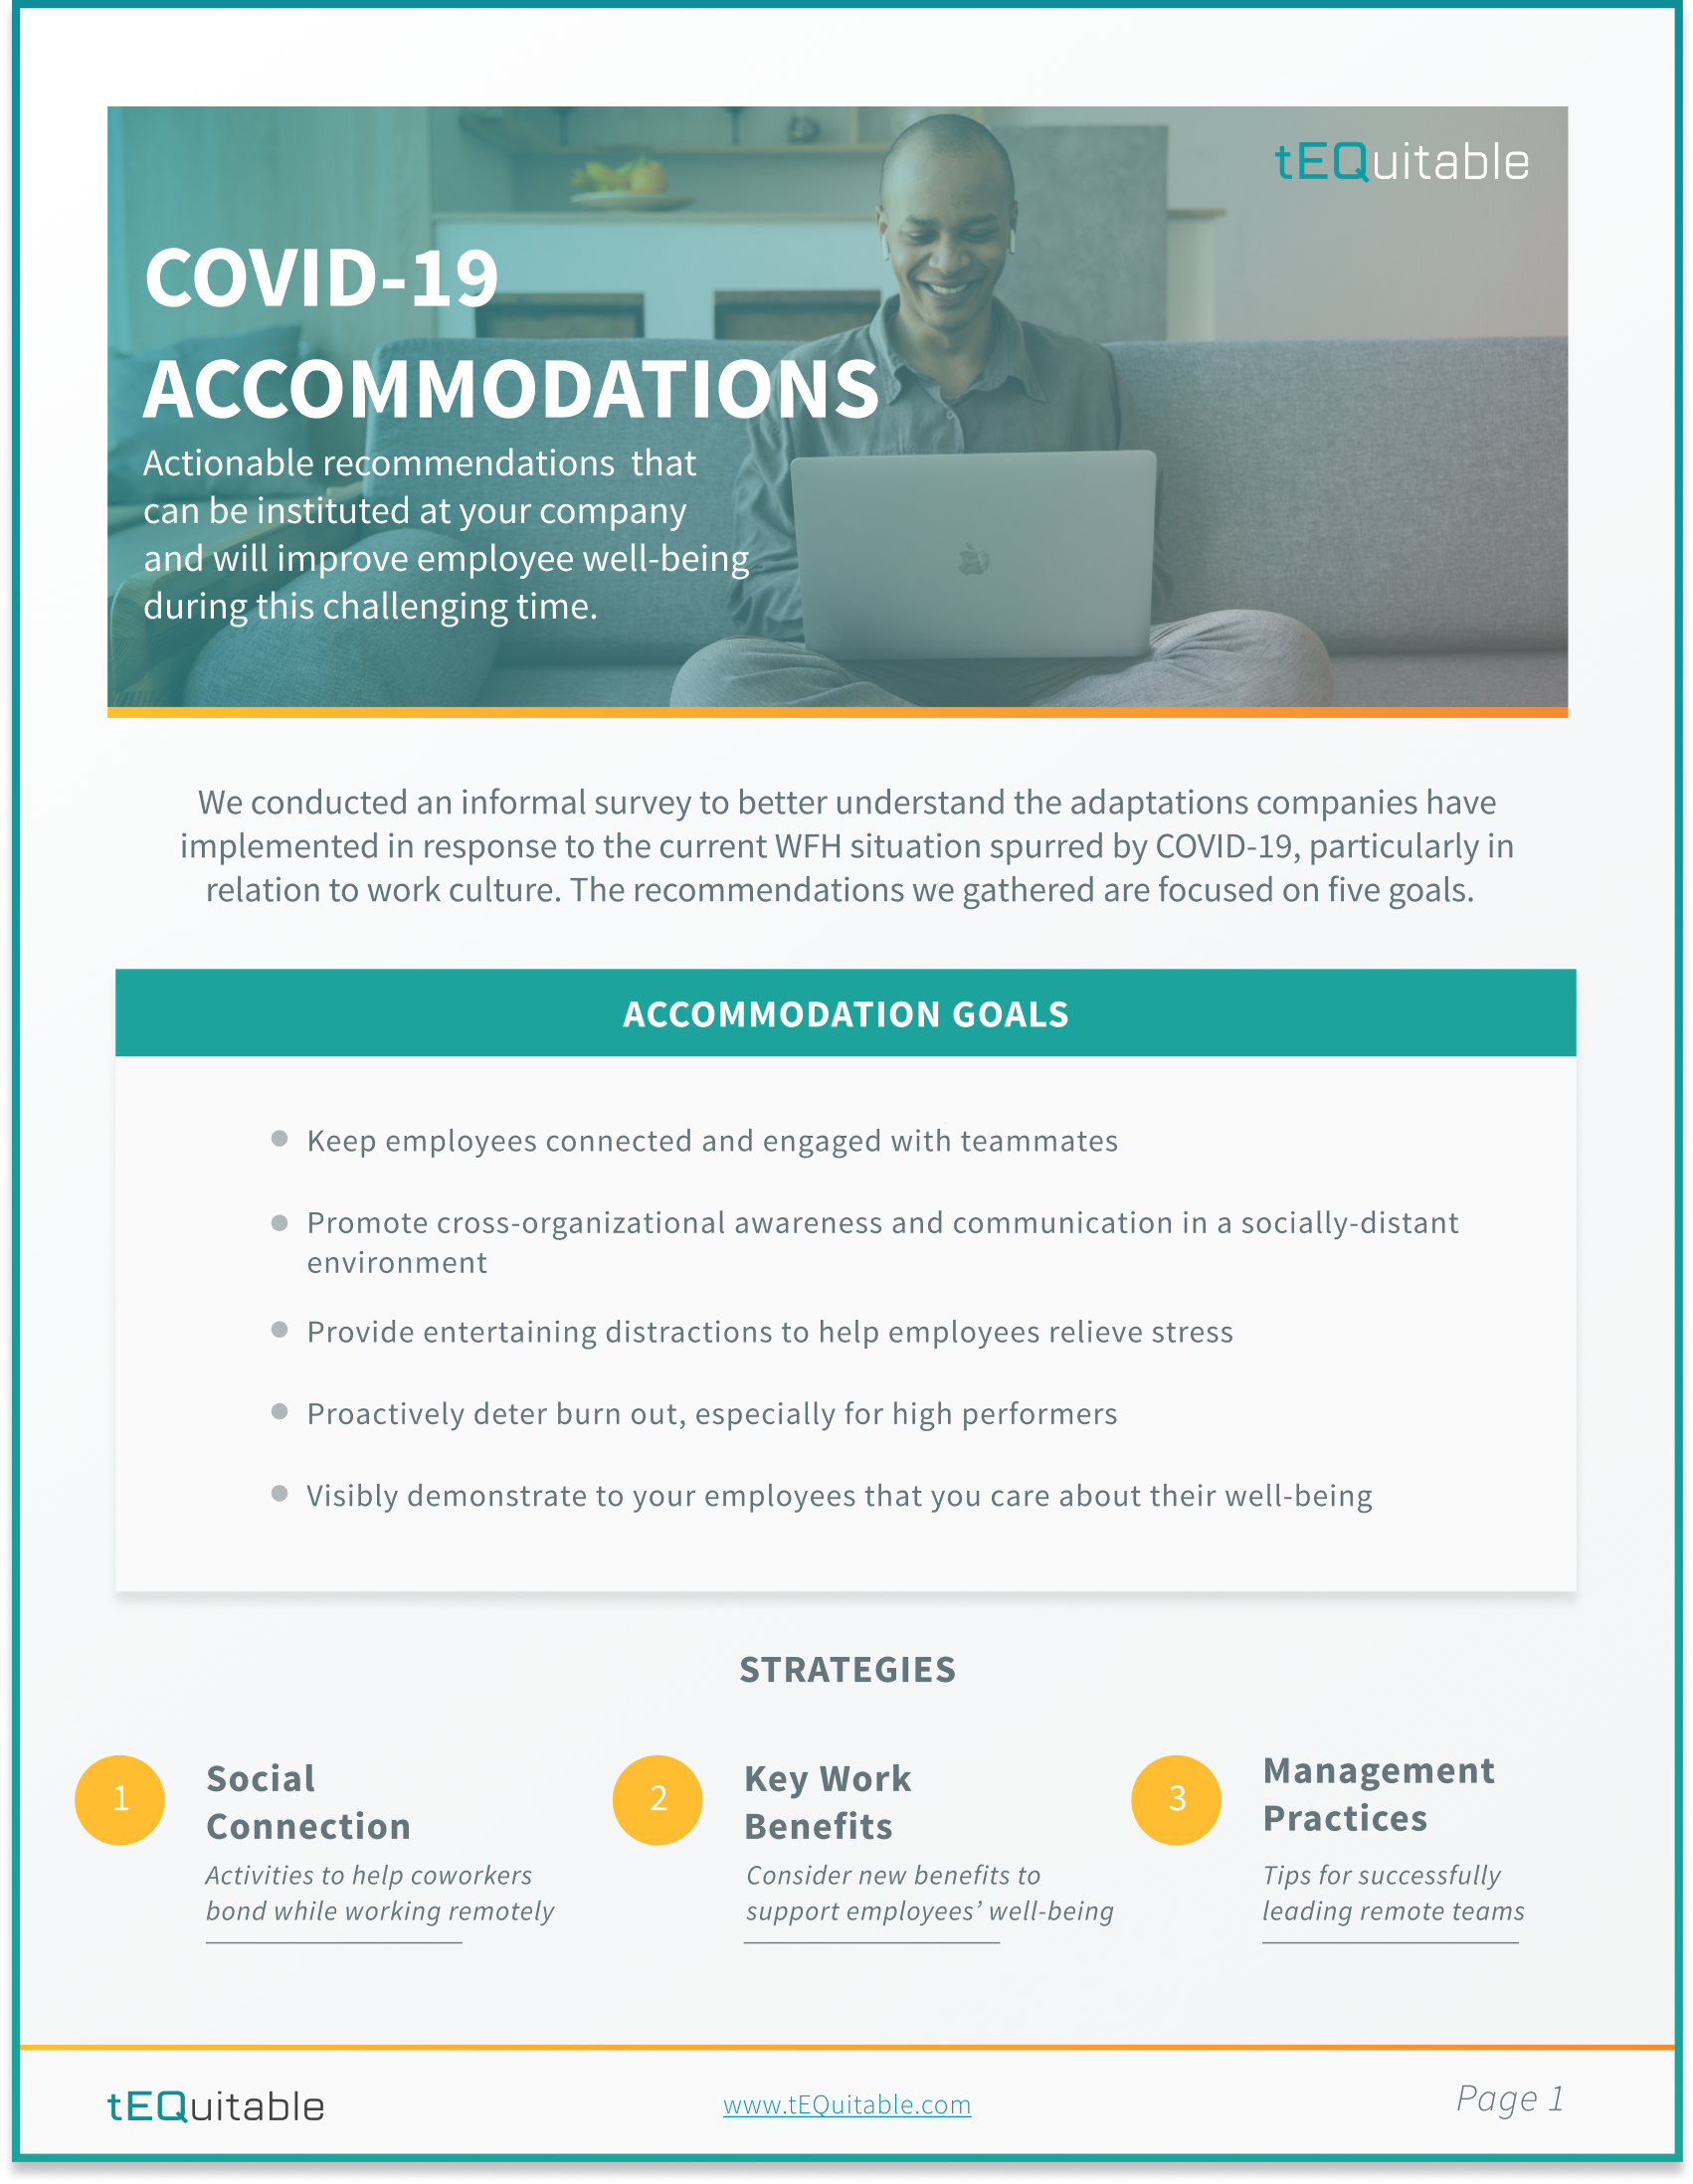 White paper with actionable insights about Covid-19 strategies around the employee experience while working remotely.